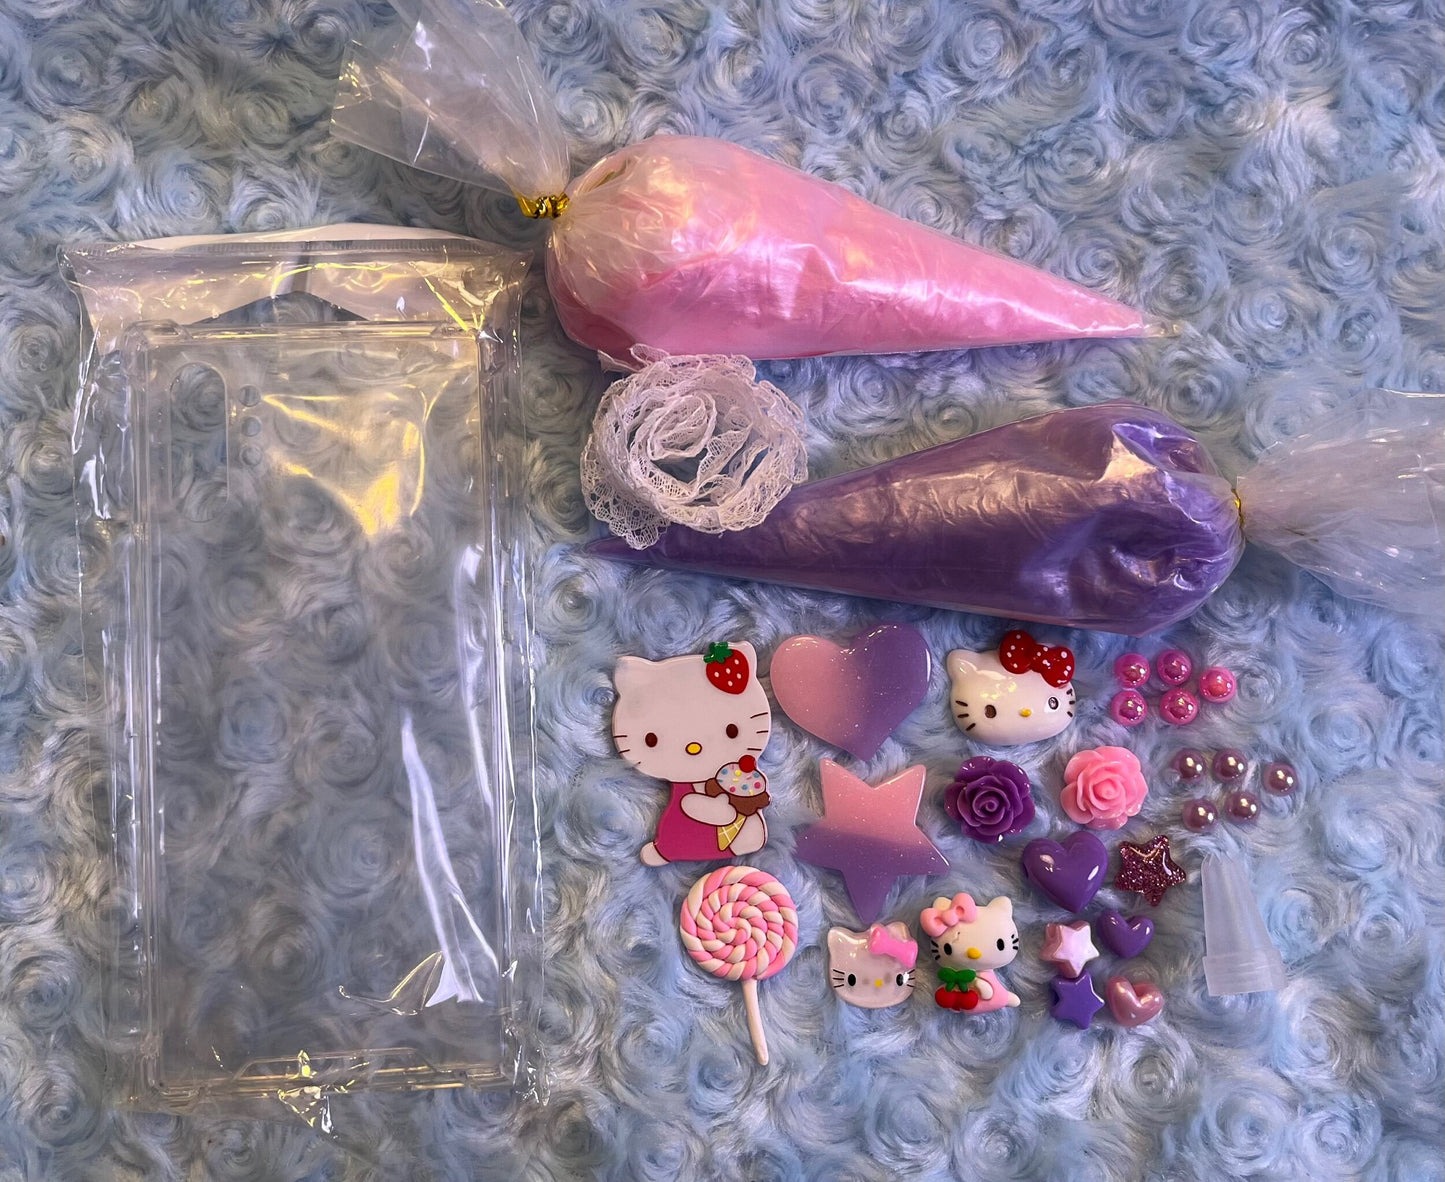 DIY Decoden Kits/Supplies (Do It Yourself!)